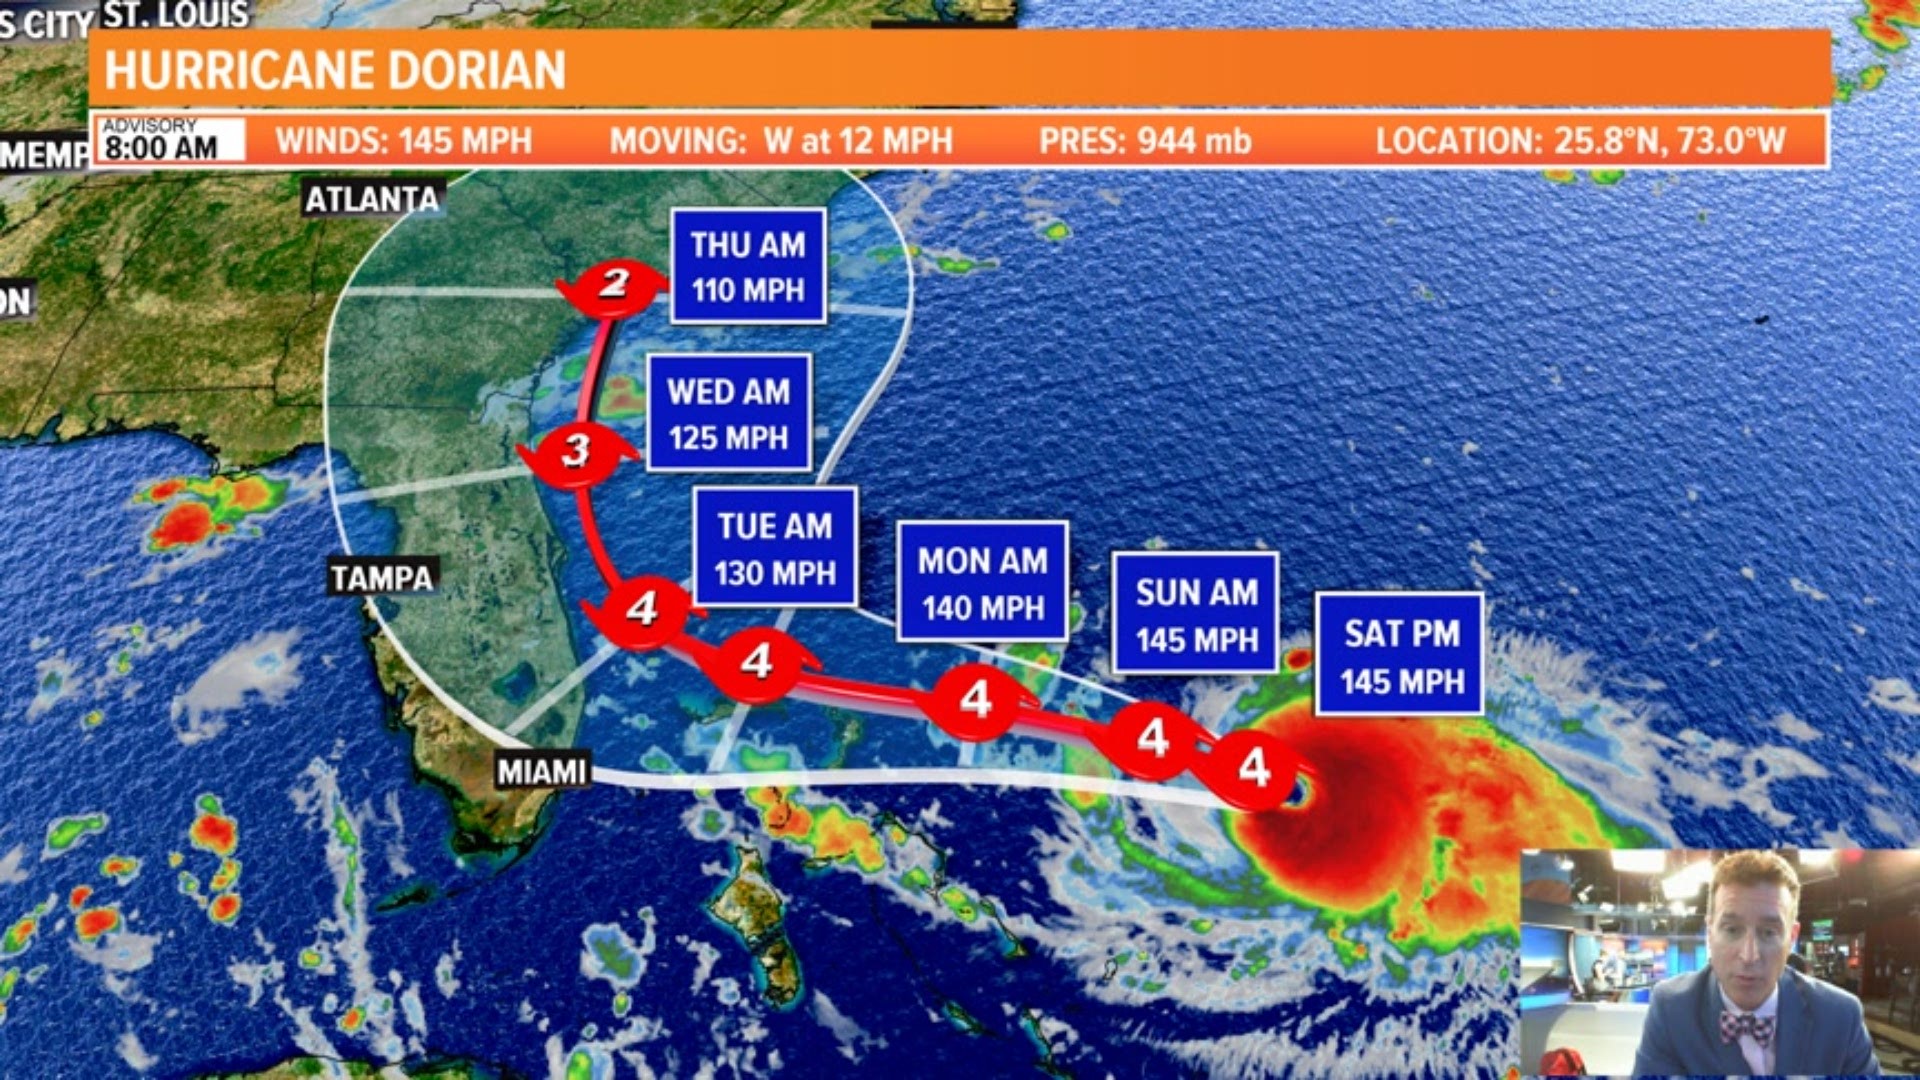 Dorian a dangerous hurricane is moving west with a shift to the east of Florida expected early next week. This is still not set in stone. Stay prepared and keep checking back!